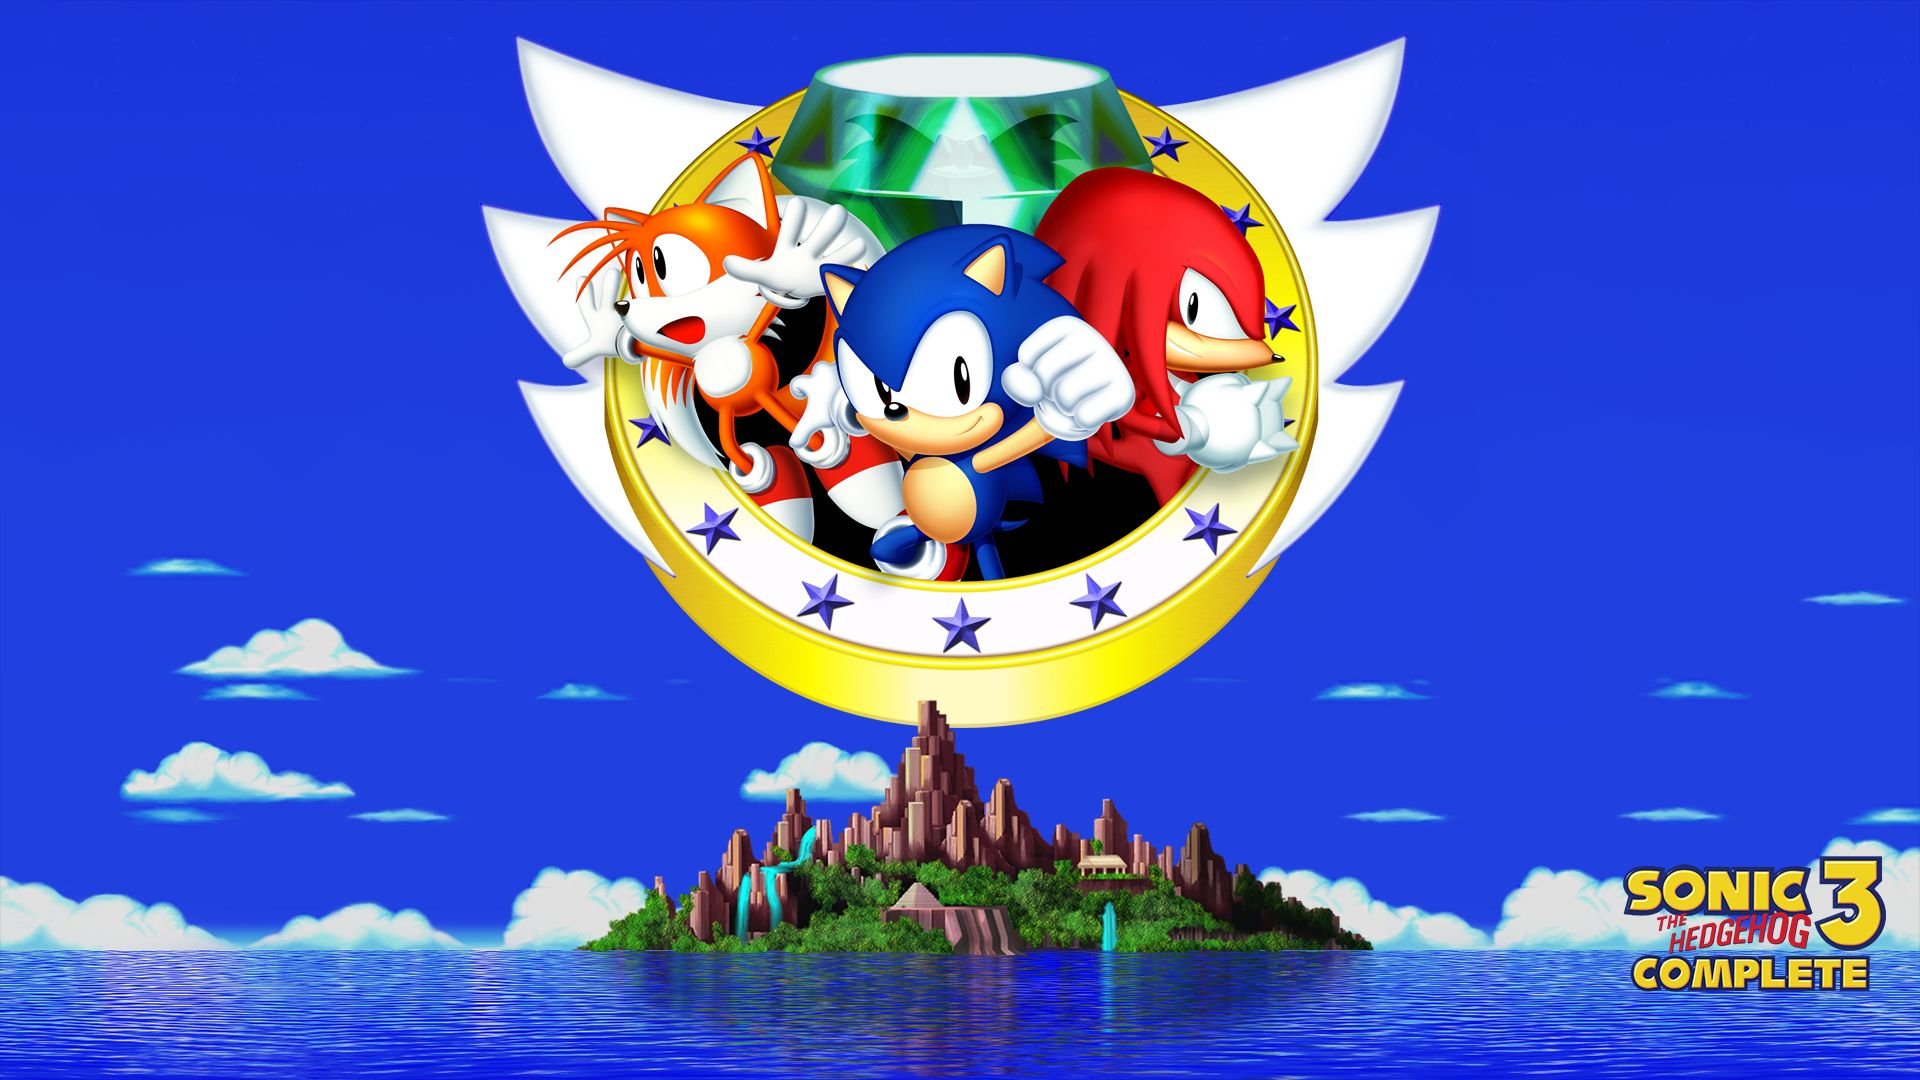 Sonic The Hedgehog Backgrounds High Quality